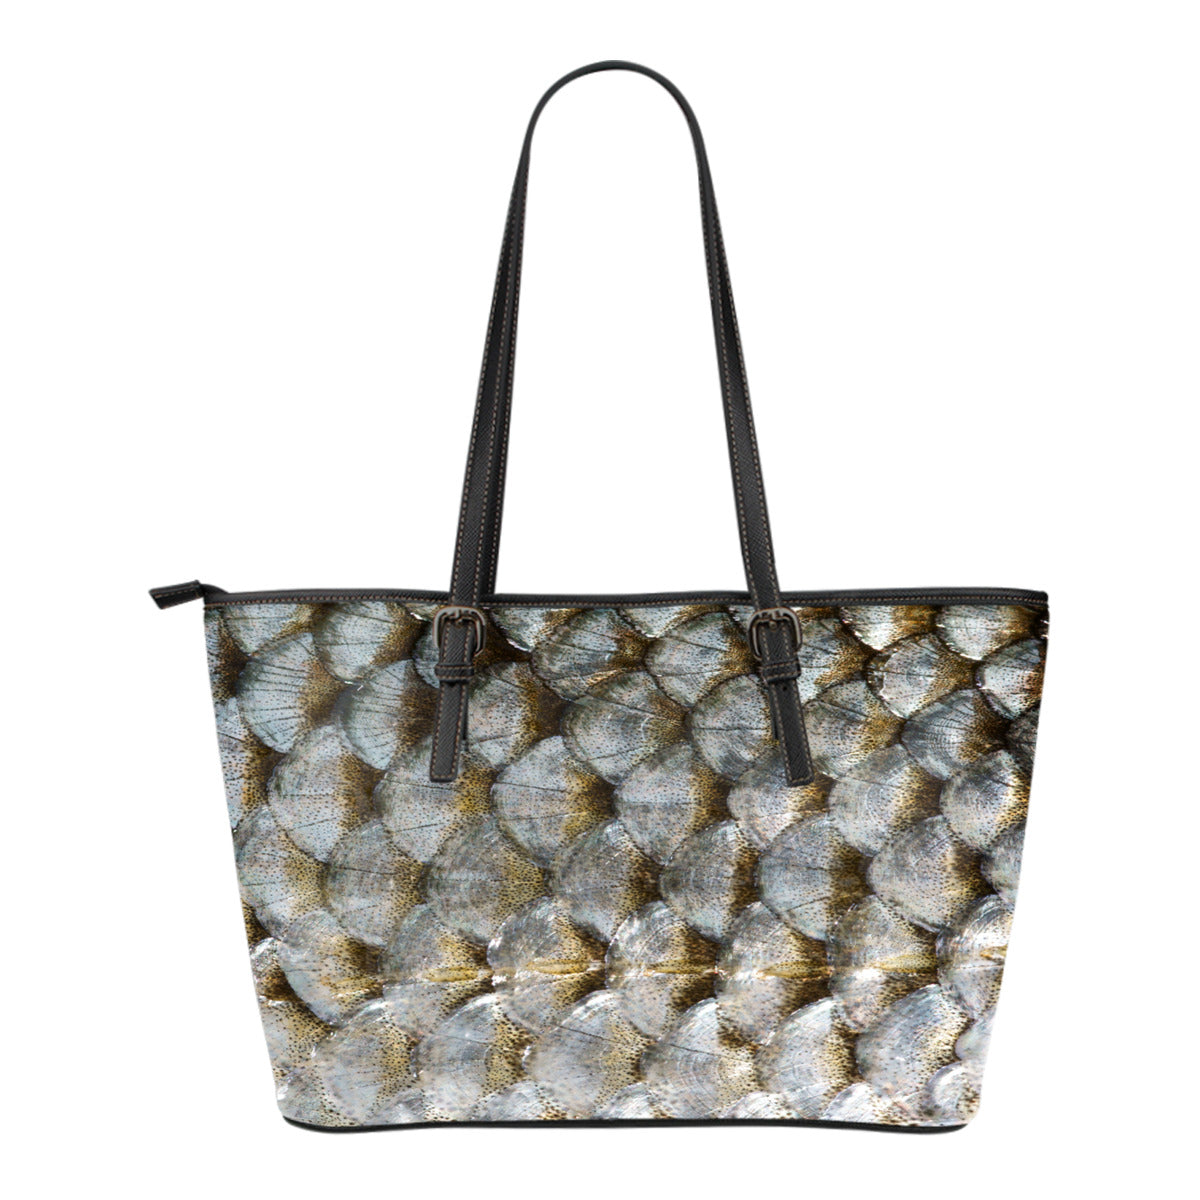 Animal Skin Texture Themed Design C3 Women Small Leather Tote Bag